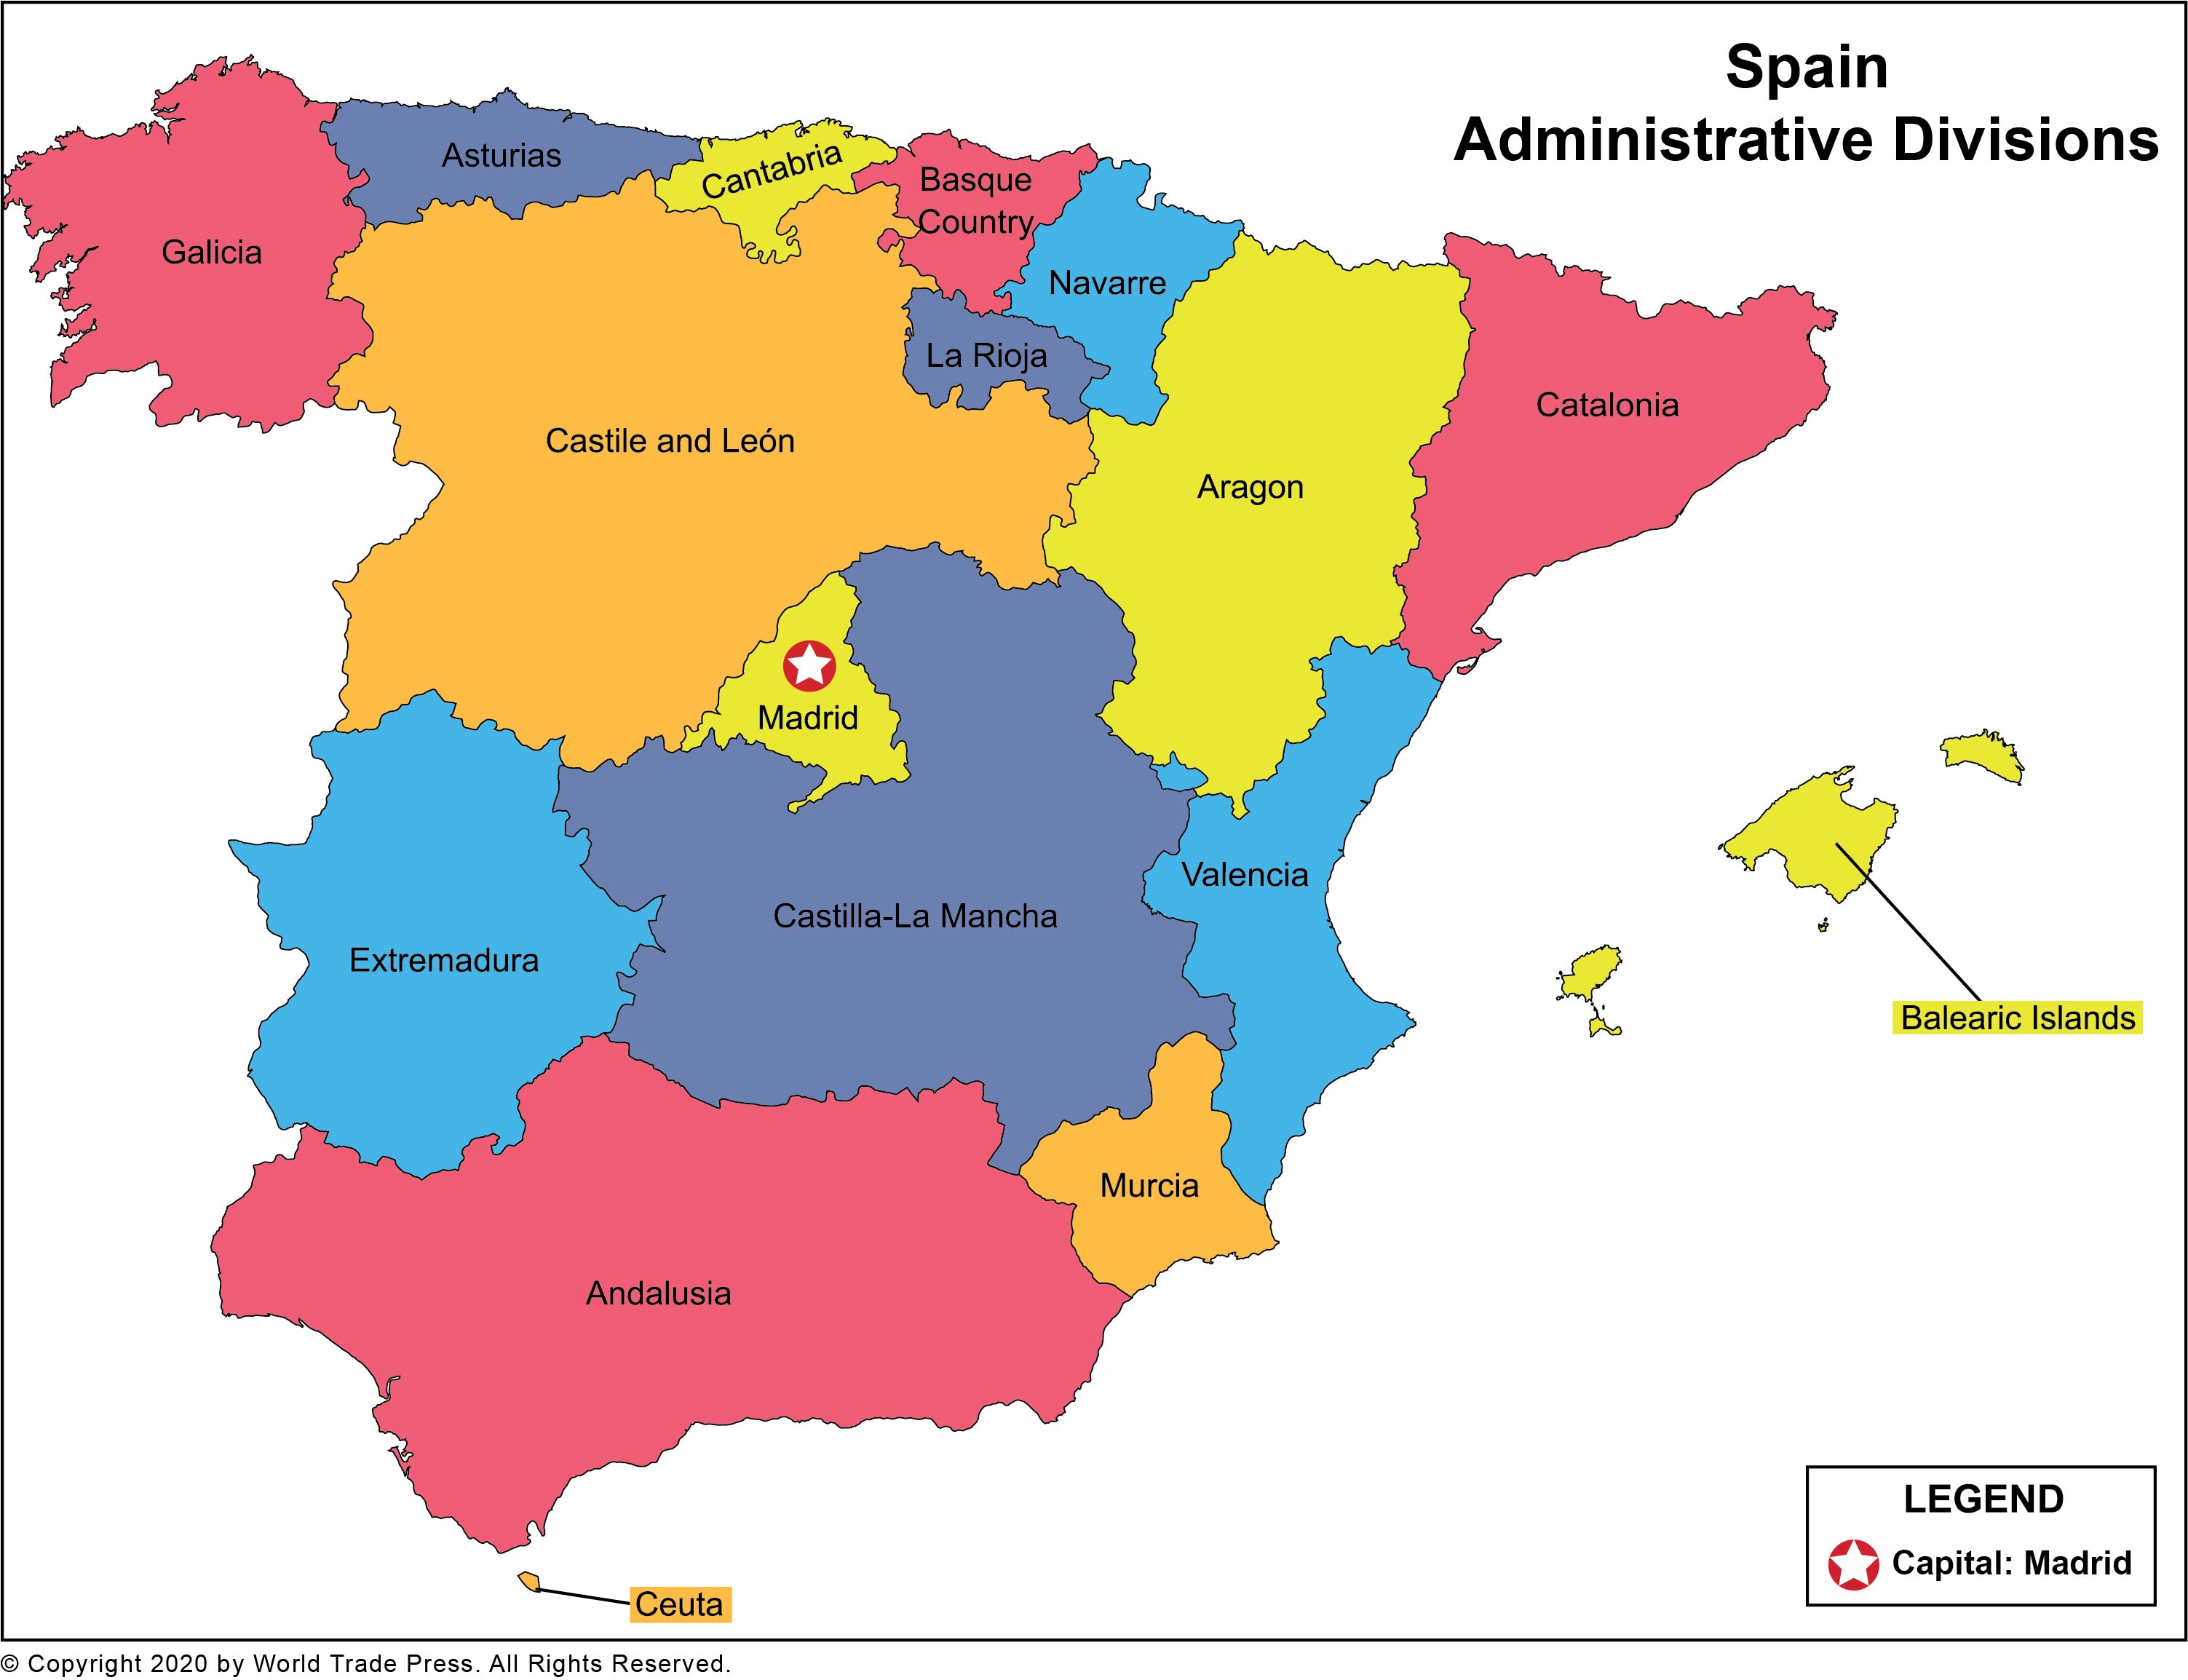 Spain Administrative Divisions